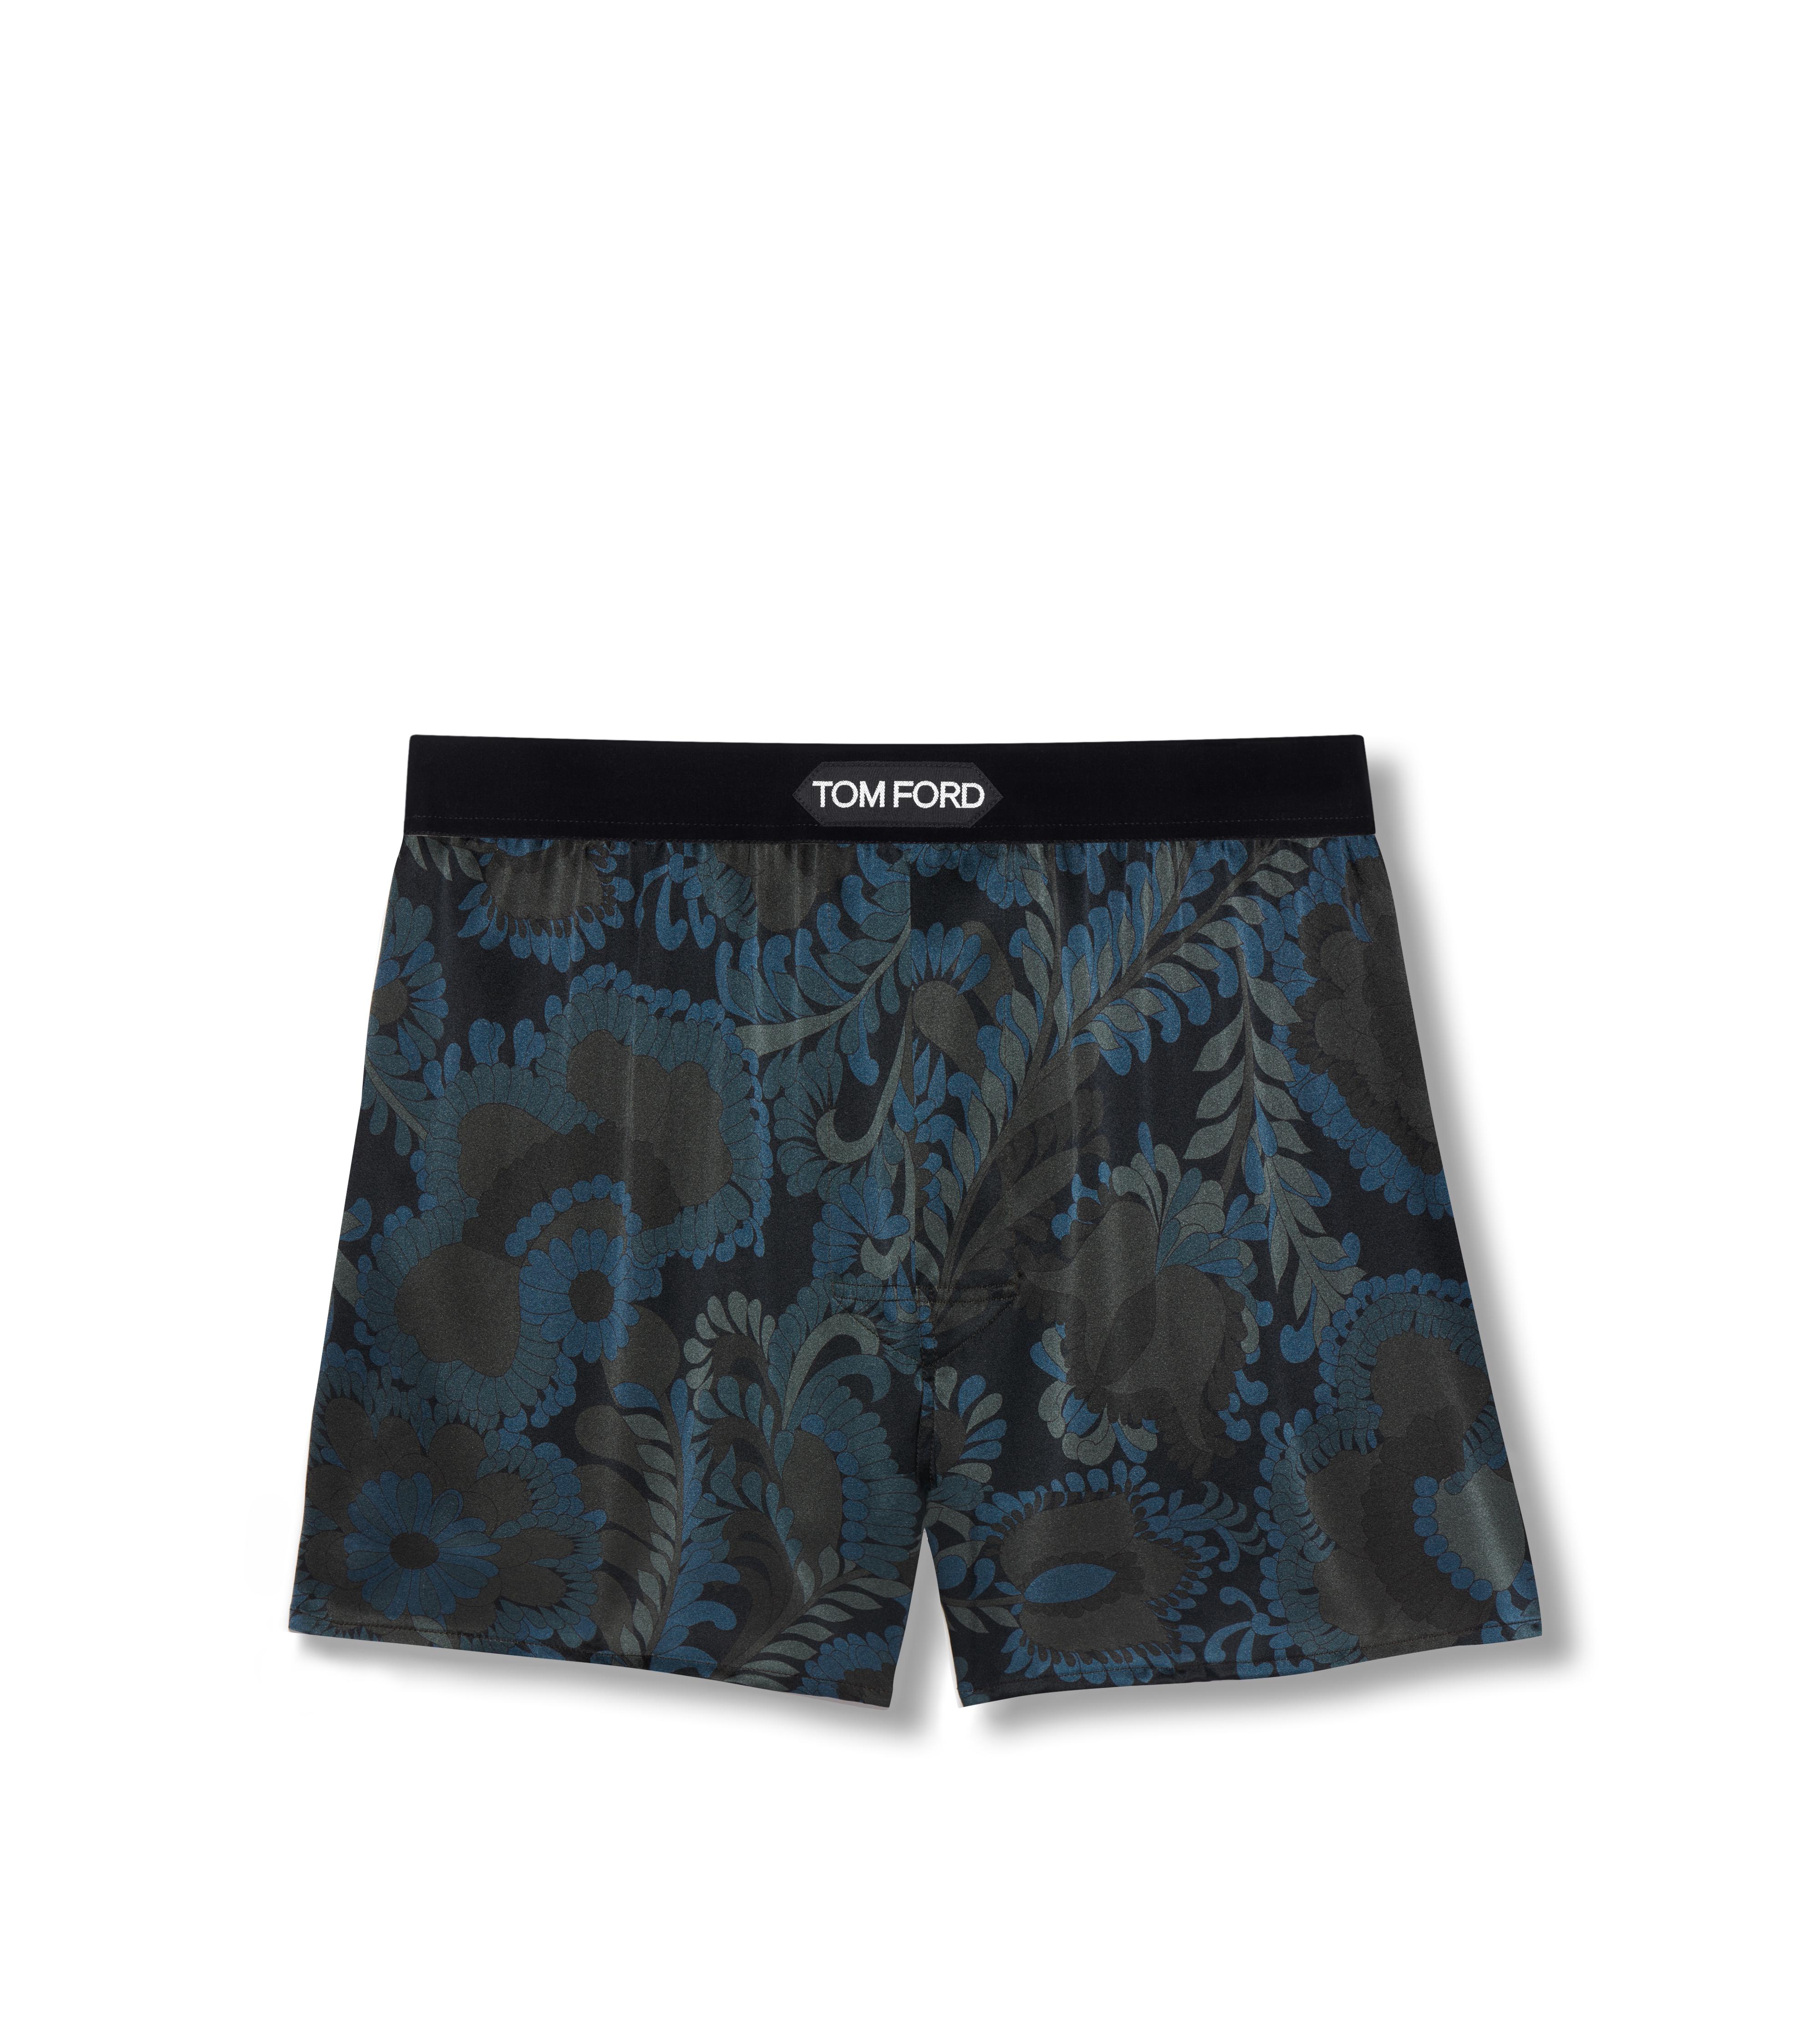 Tom Ford 70’S PAISLEY FLORAL SILK BOXERS - Men | TomFord.com